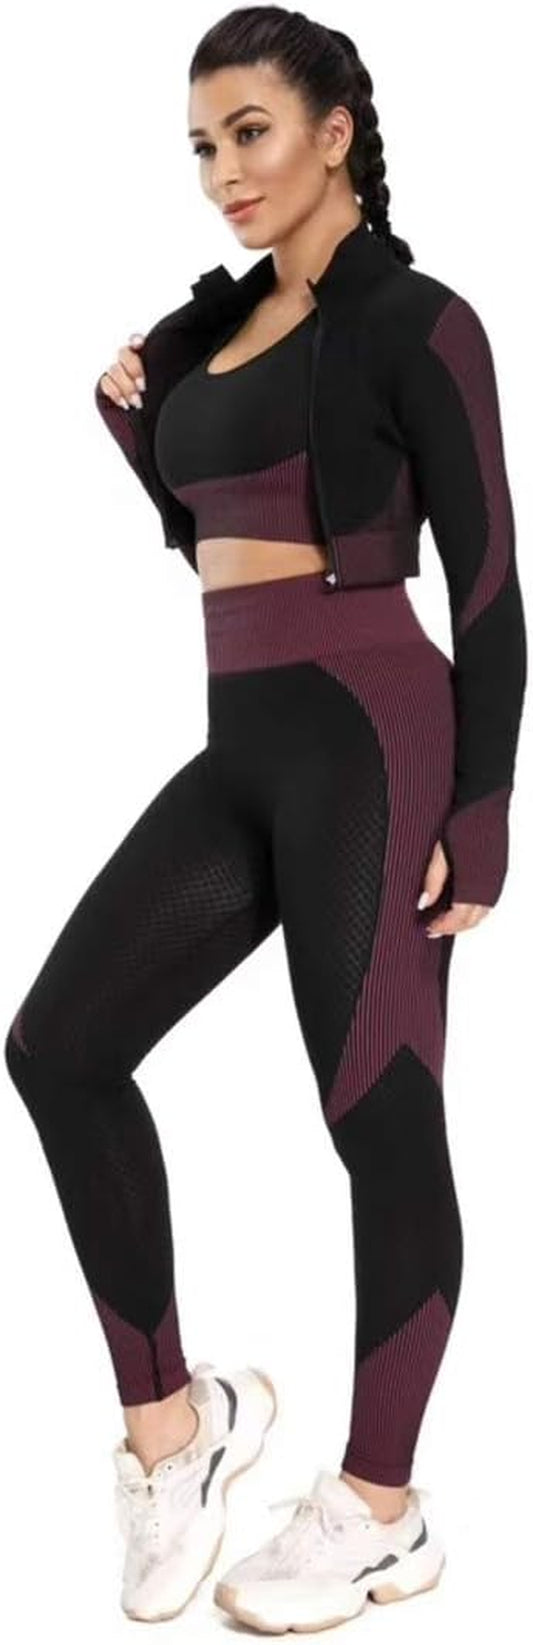 Workout Sets Women 2 Piece Gym Outfits Seamless Yoga Long Sleeve Zip Tracksuit High Waist Legging Exercise Fitness Activewear Wine Medium